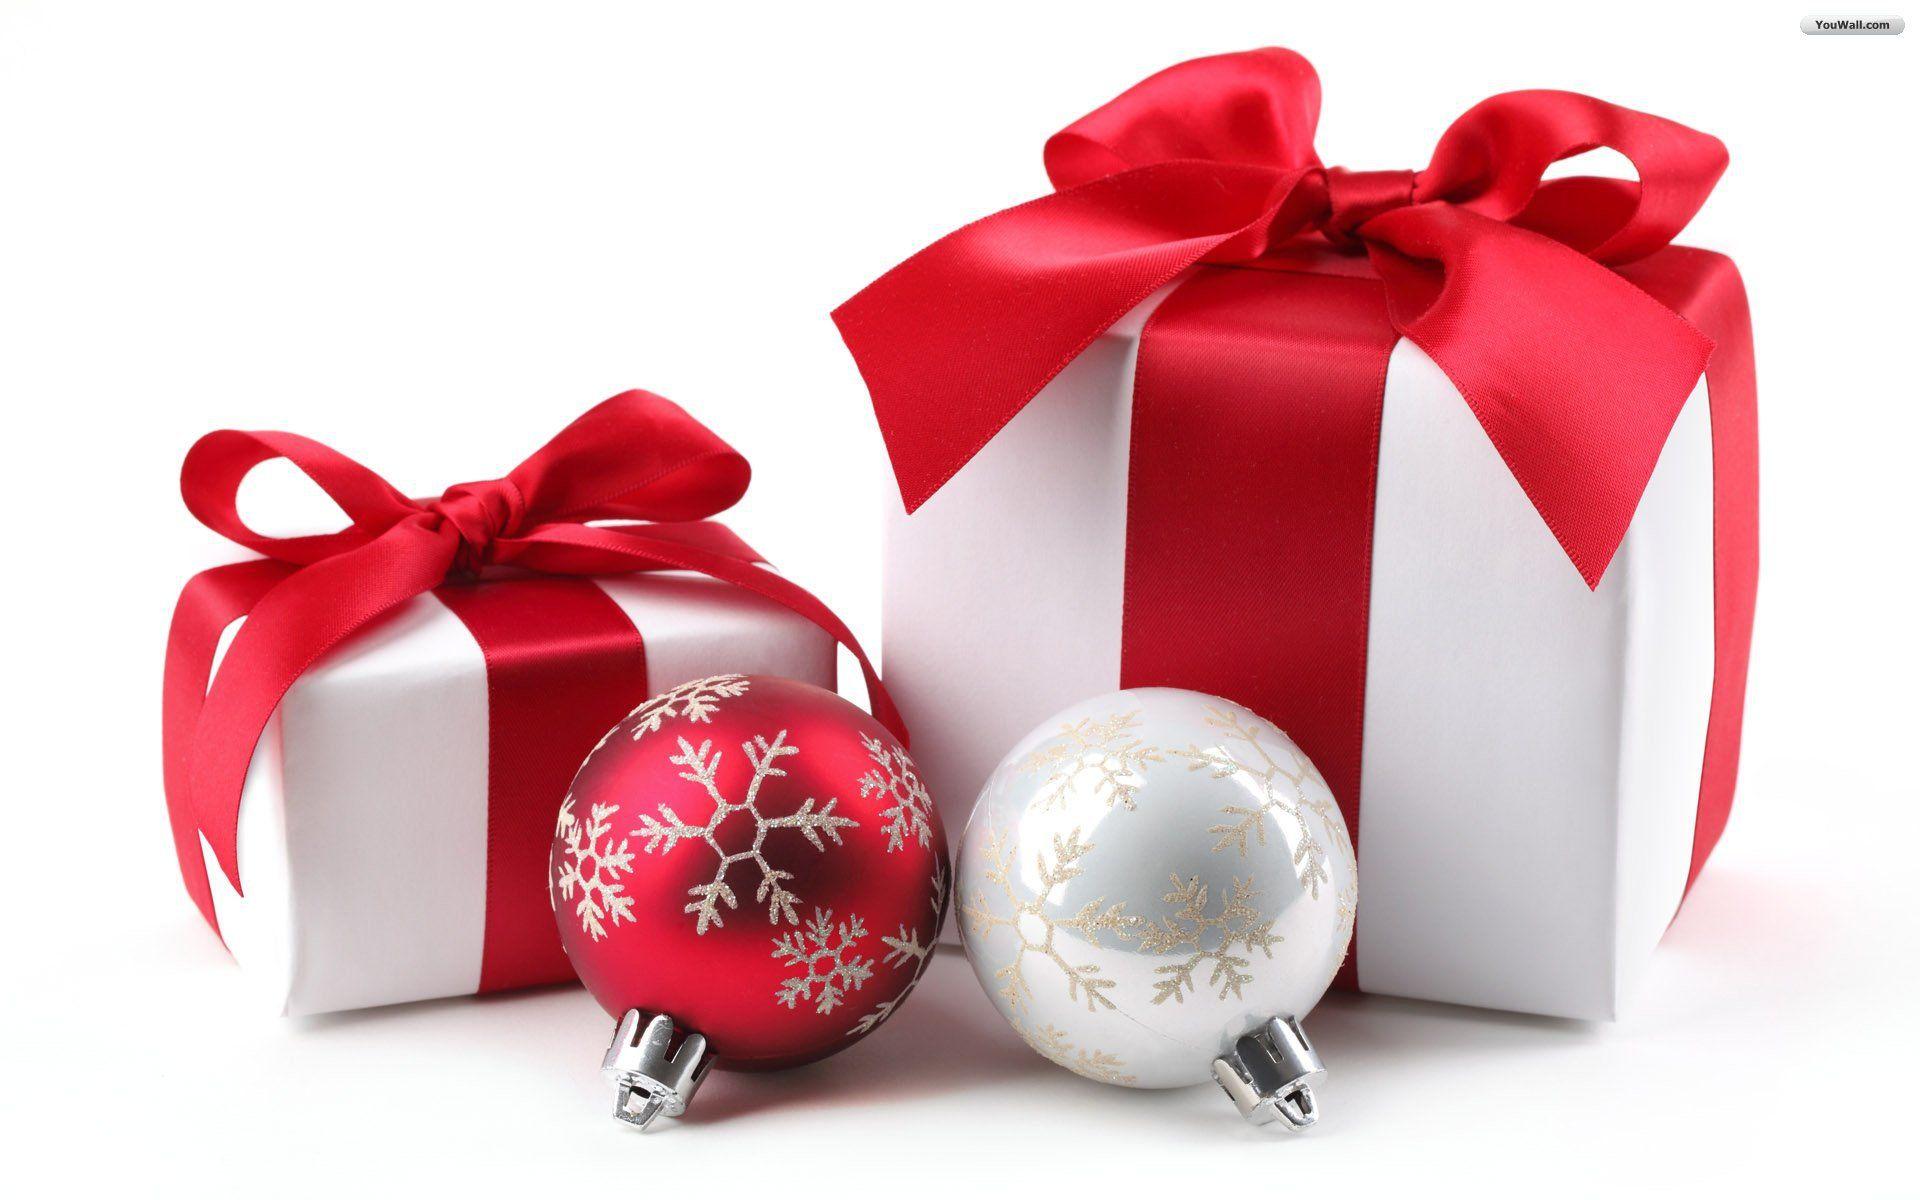 Gift boxes and Christmas decorations on Christmas wallpaper